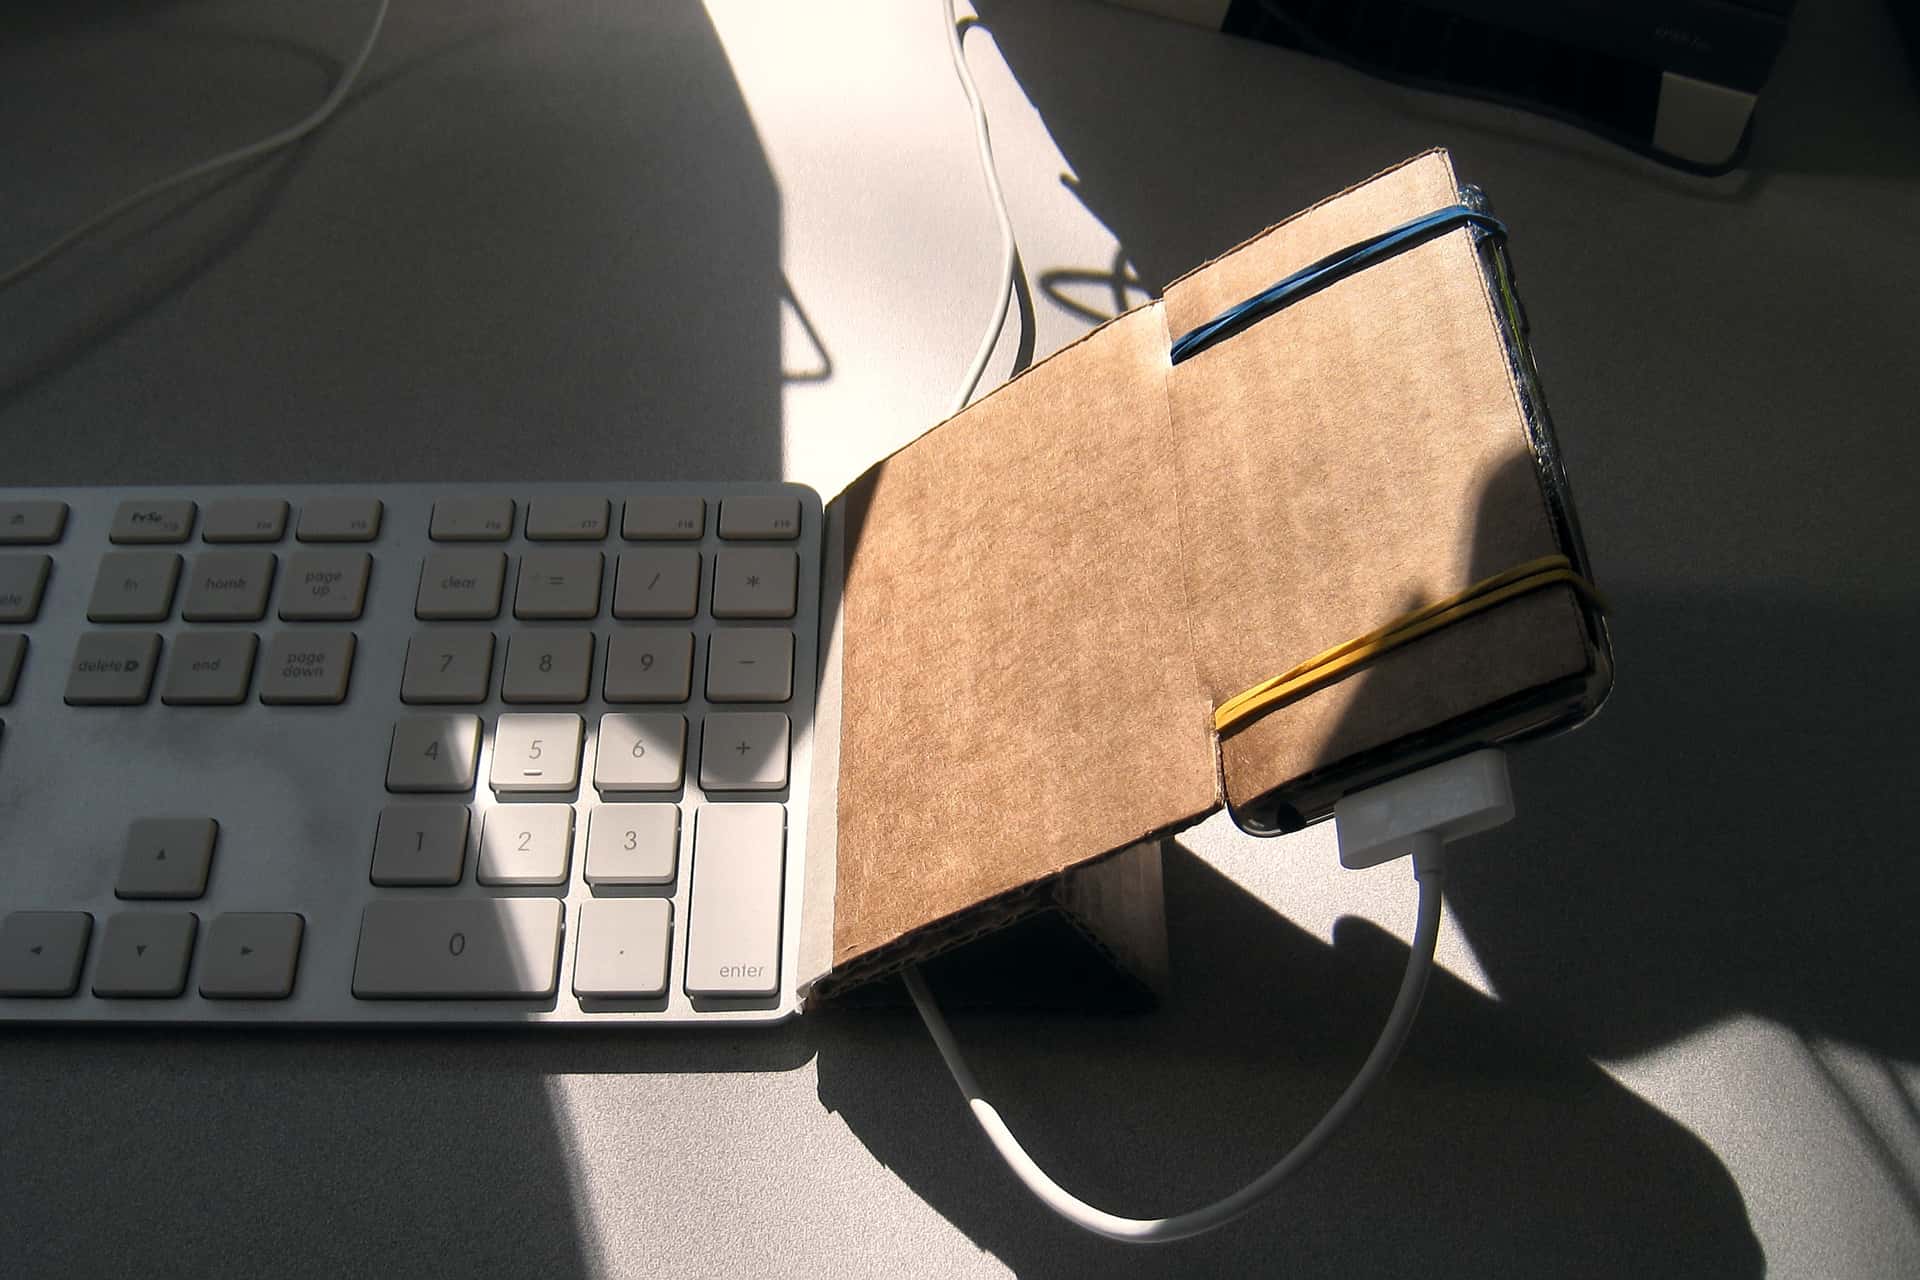 upside-down touchpad constructed from cardboard and an iPad Touch